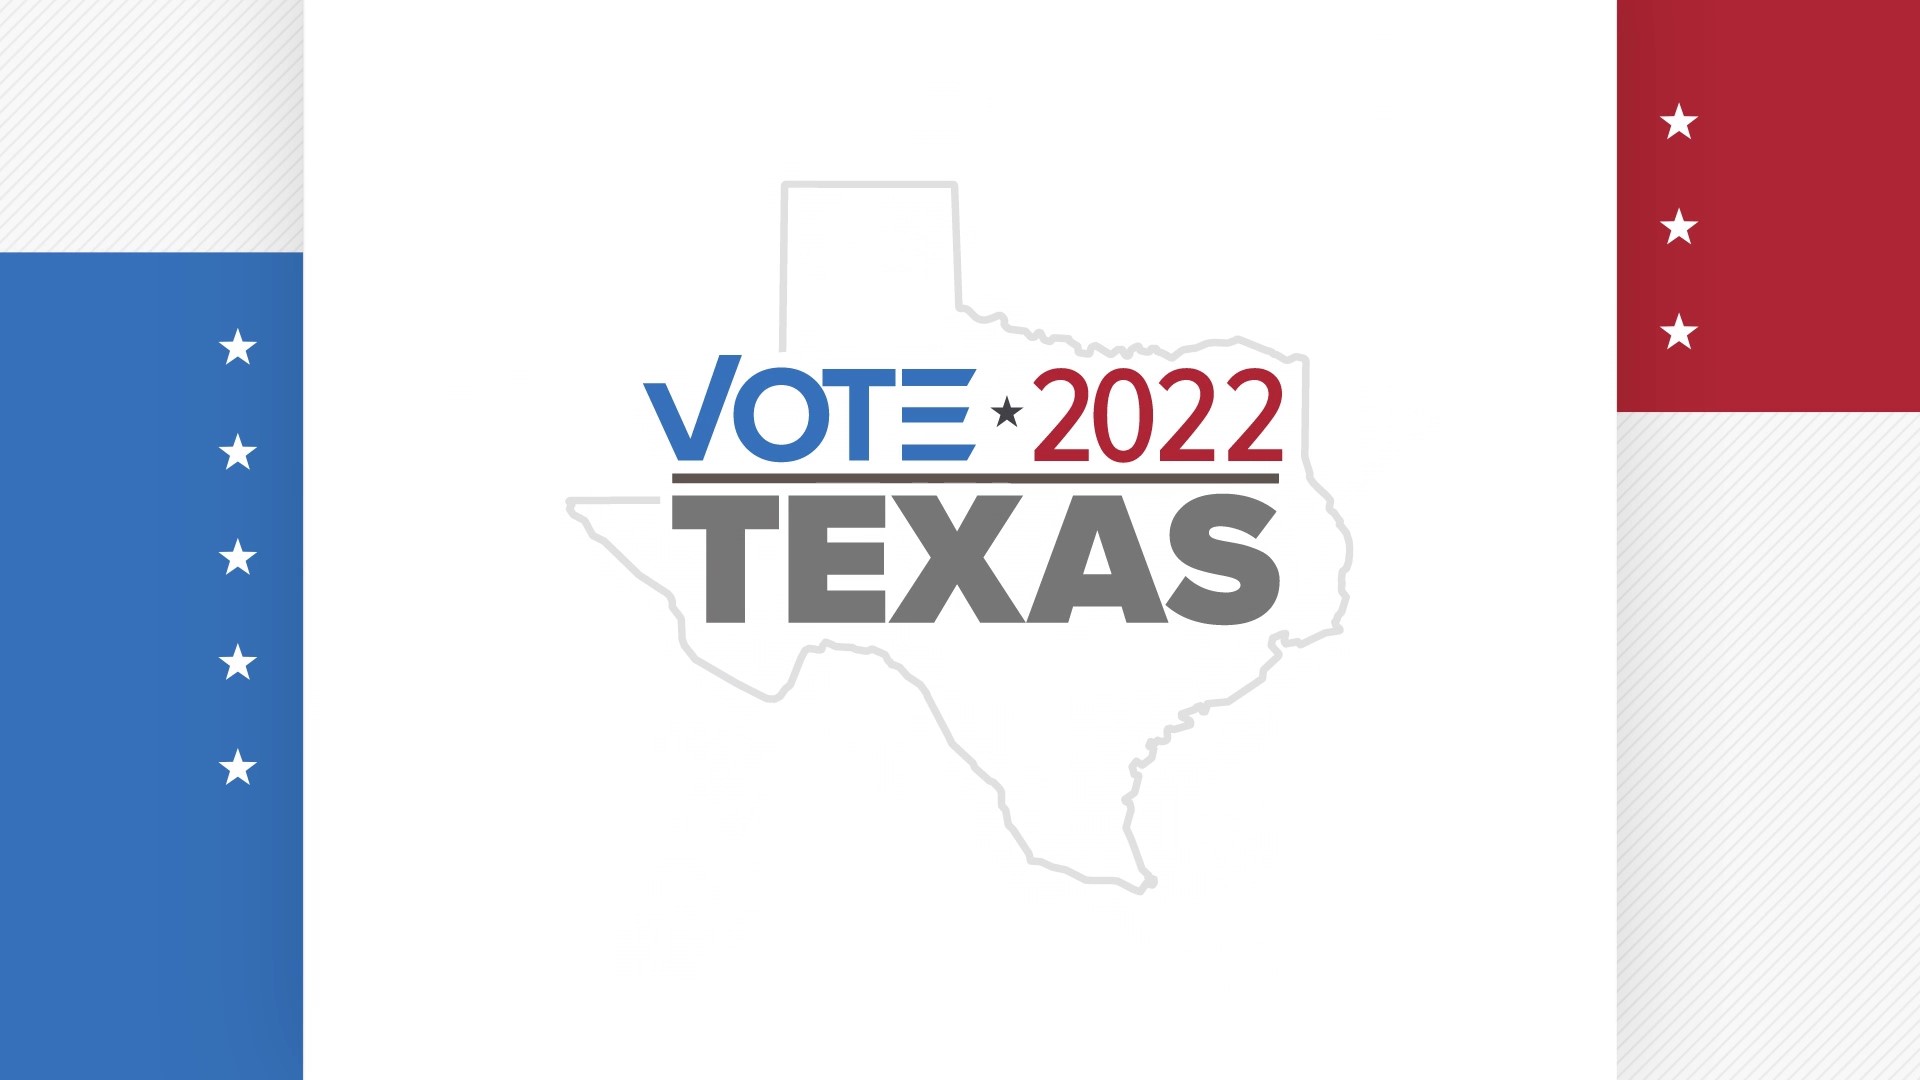 This is a big election for Texas, with the Governor's seat and every U.S. Representative's seat on the ballot.